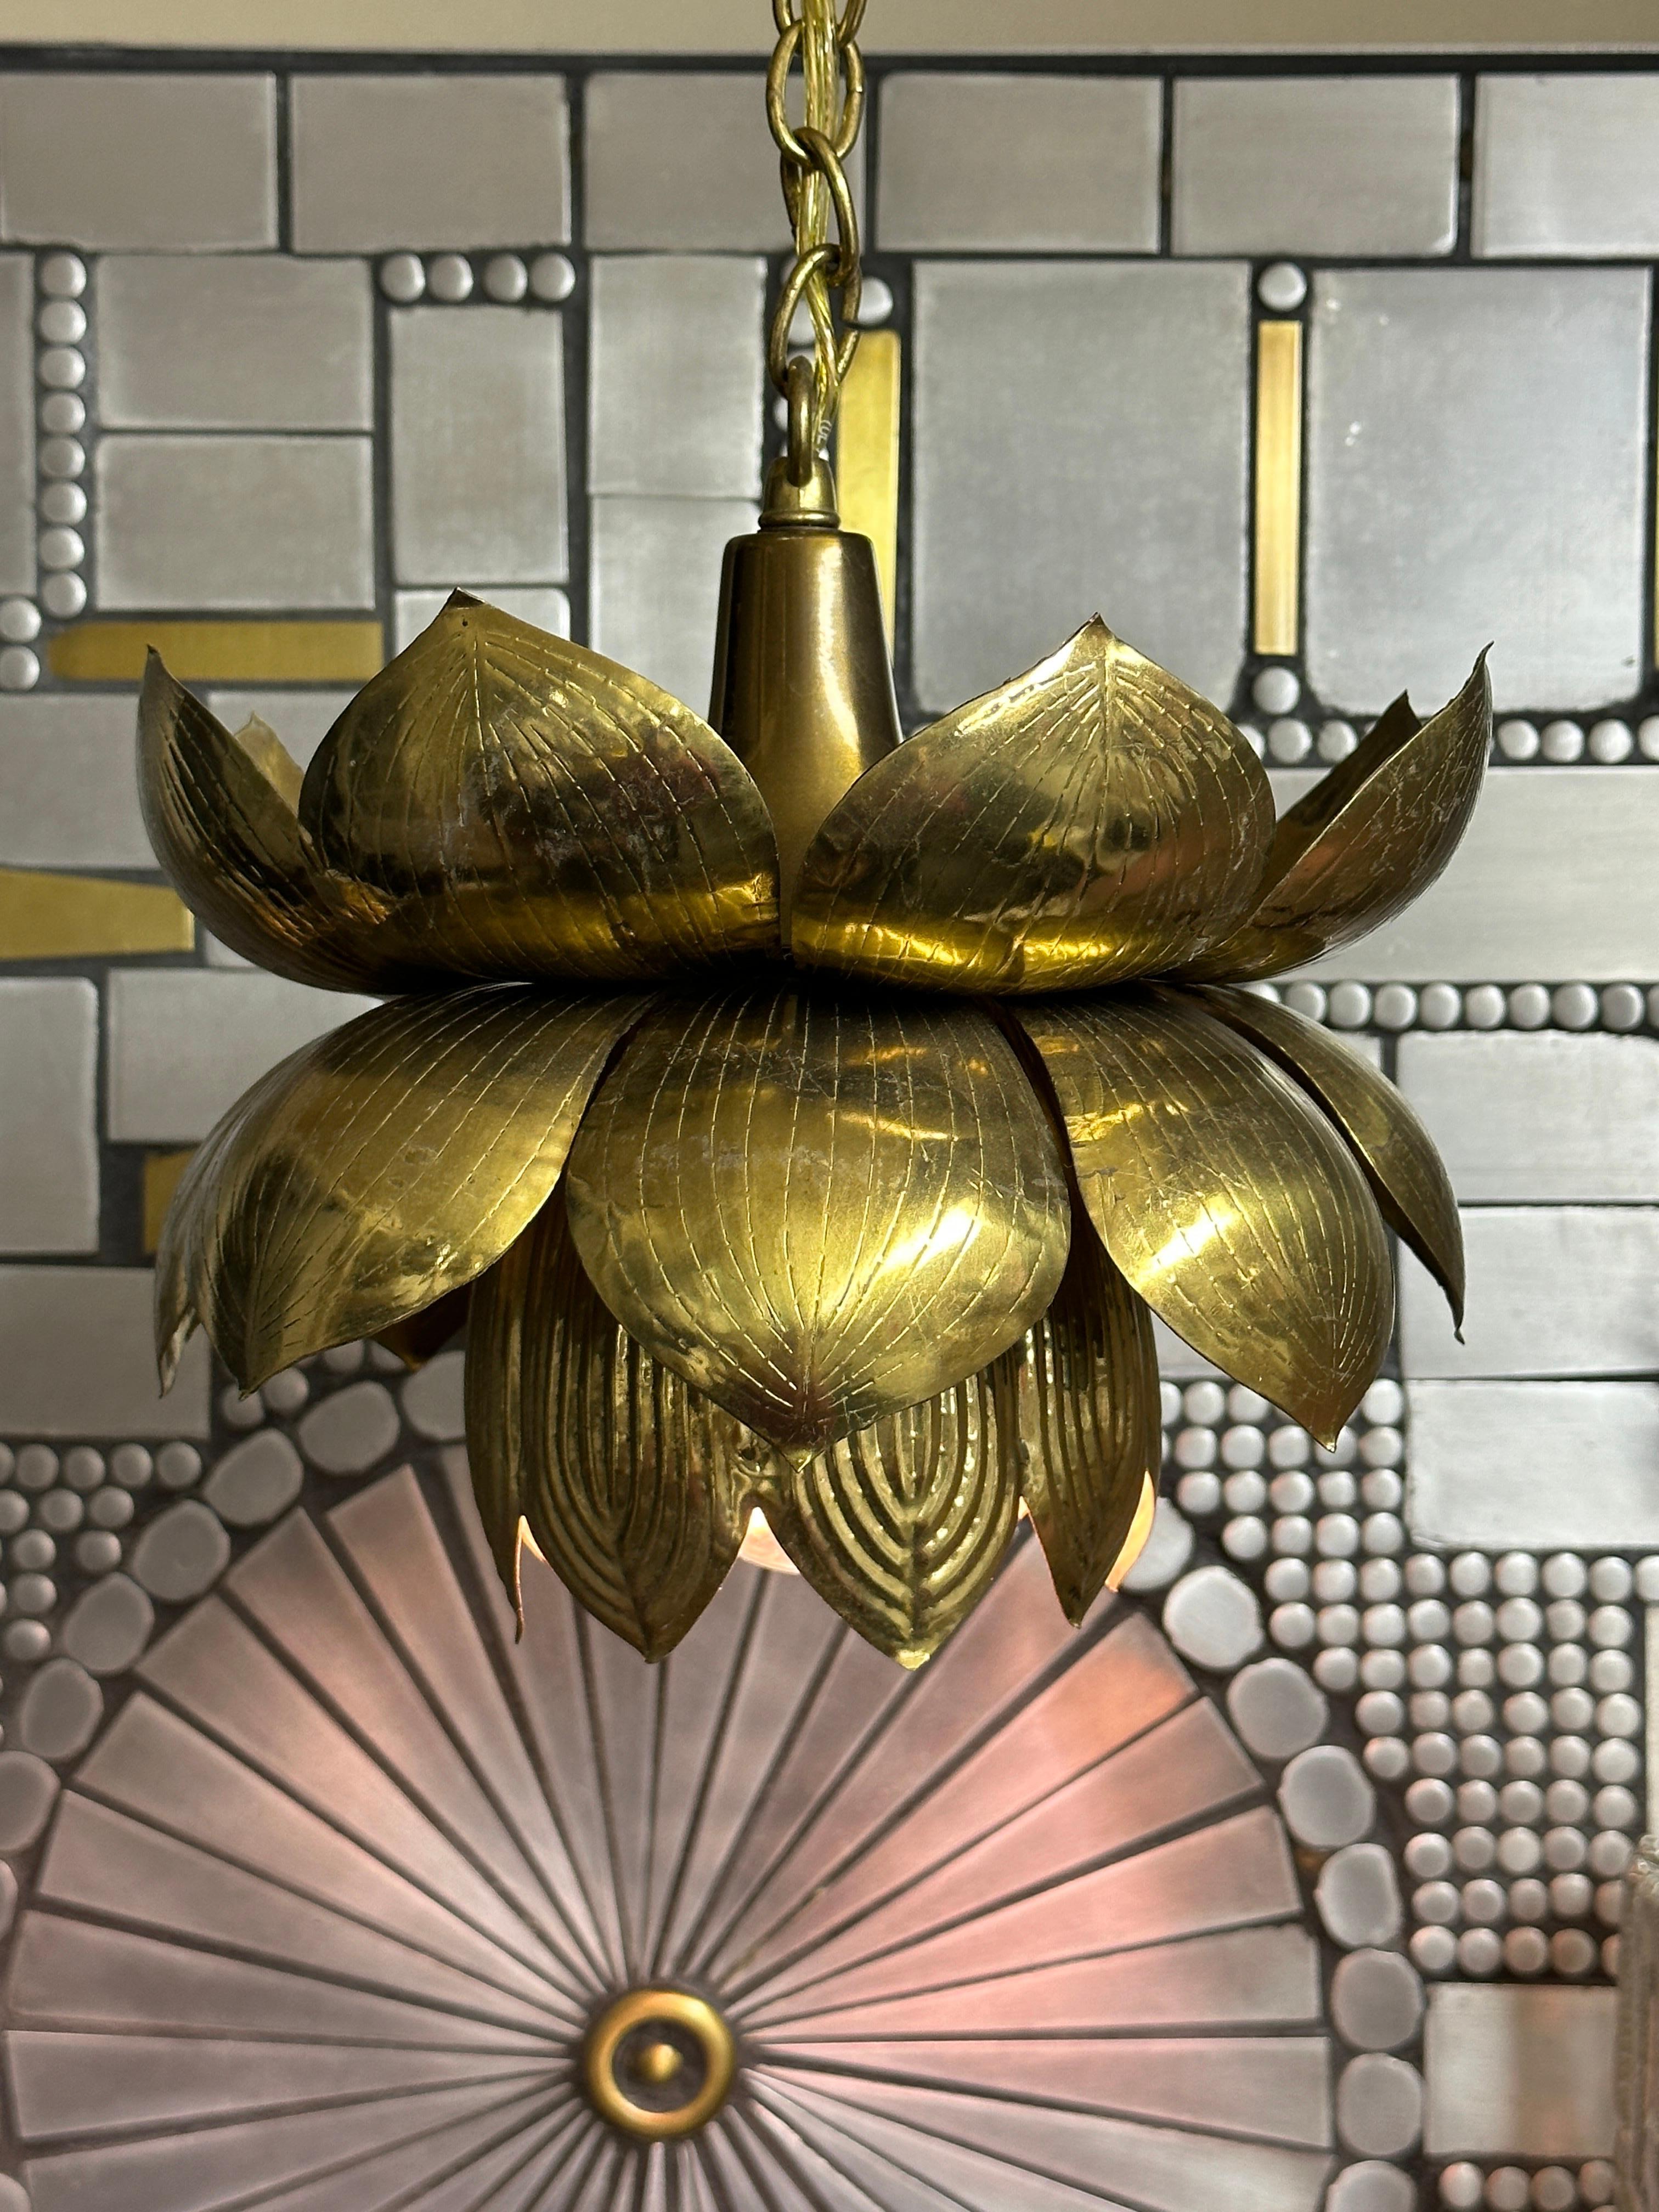 Feldman brass lotus hanging pendant light. Brass has not been polished and retains all original patina. Lotus itself is 10” diameter by 8 high.
Two available. Sold individually.